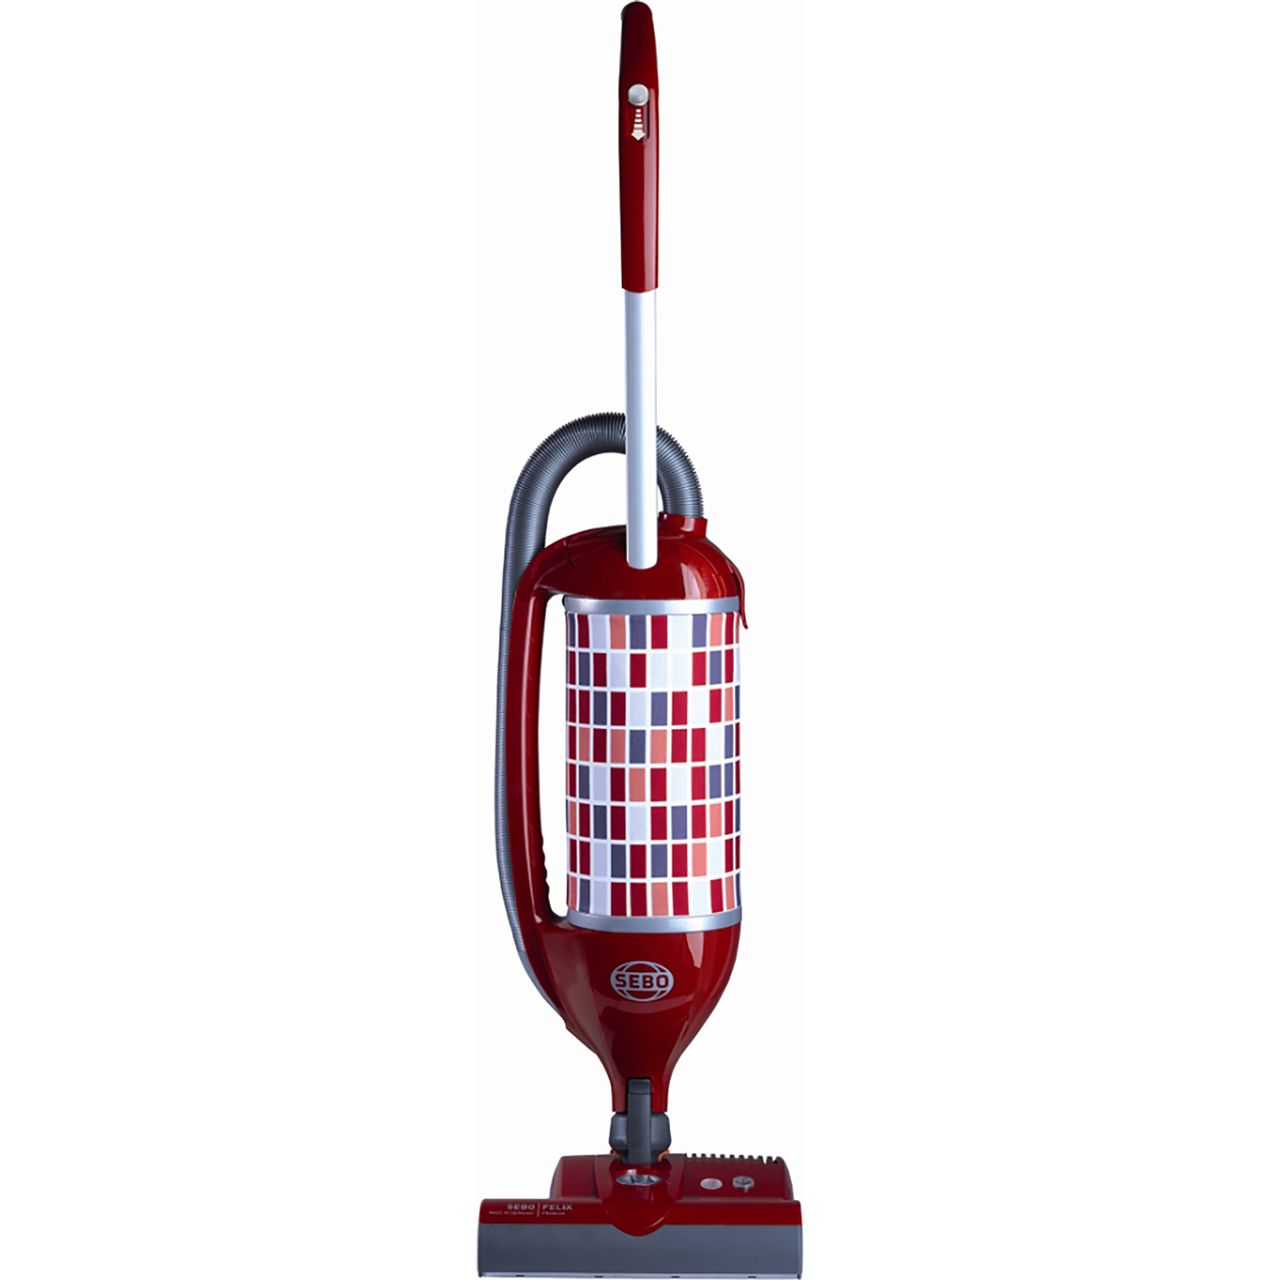 Sebo Felix Rosso ePower 90813GB Upright Vacuum Cleaner Review